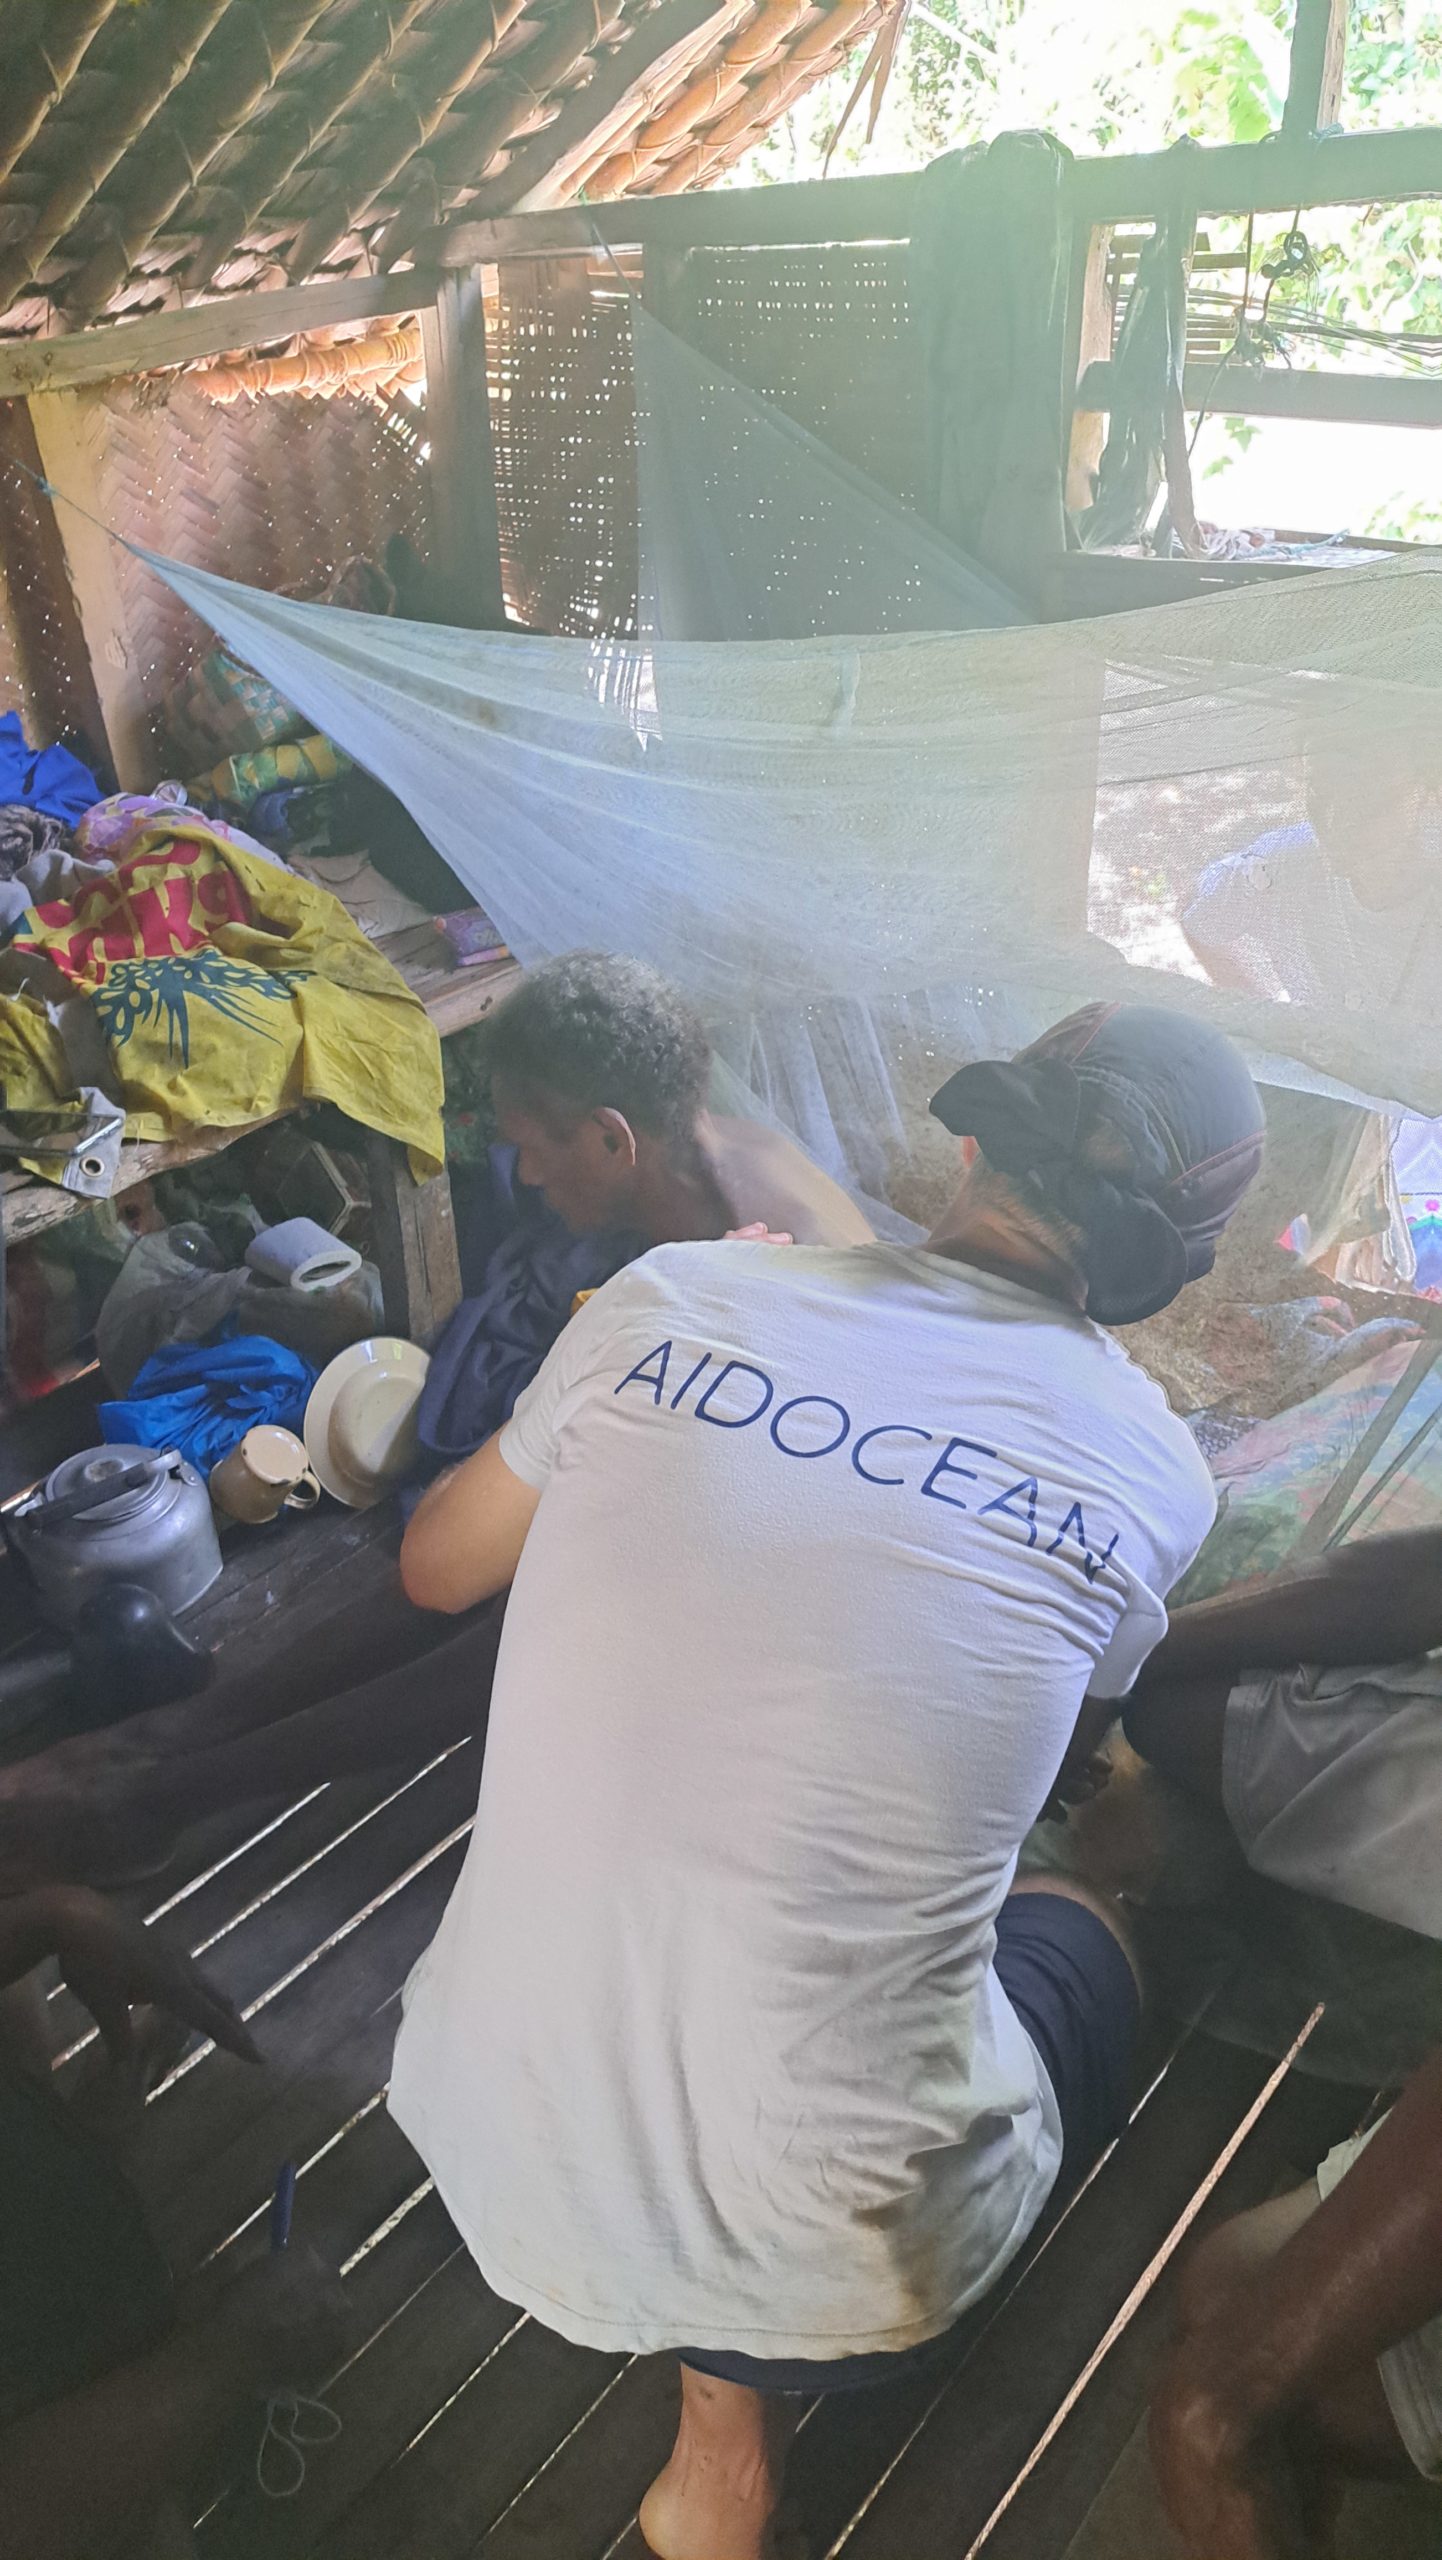 Mission humanitaire aidocean papouasie